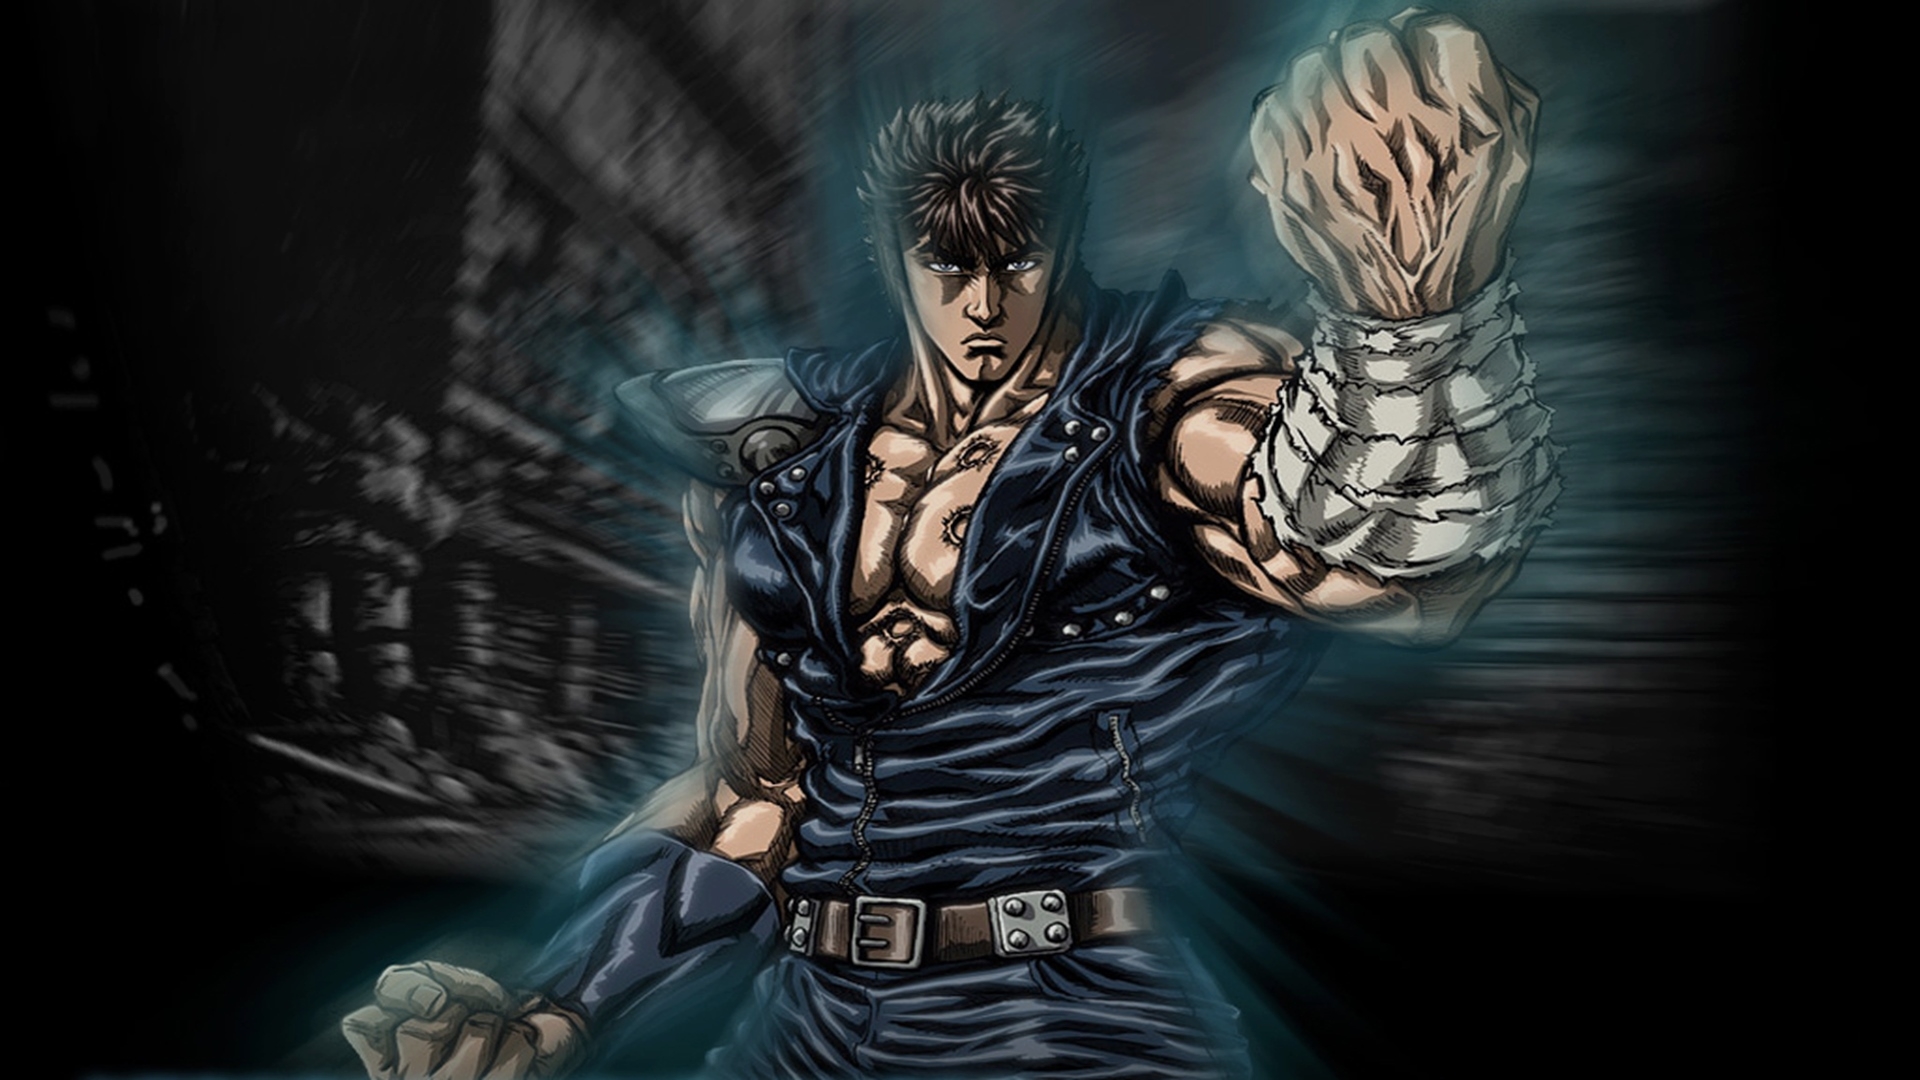 Kenshiro Fist Of The North Star Anime Photo Pictures to